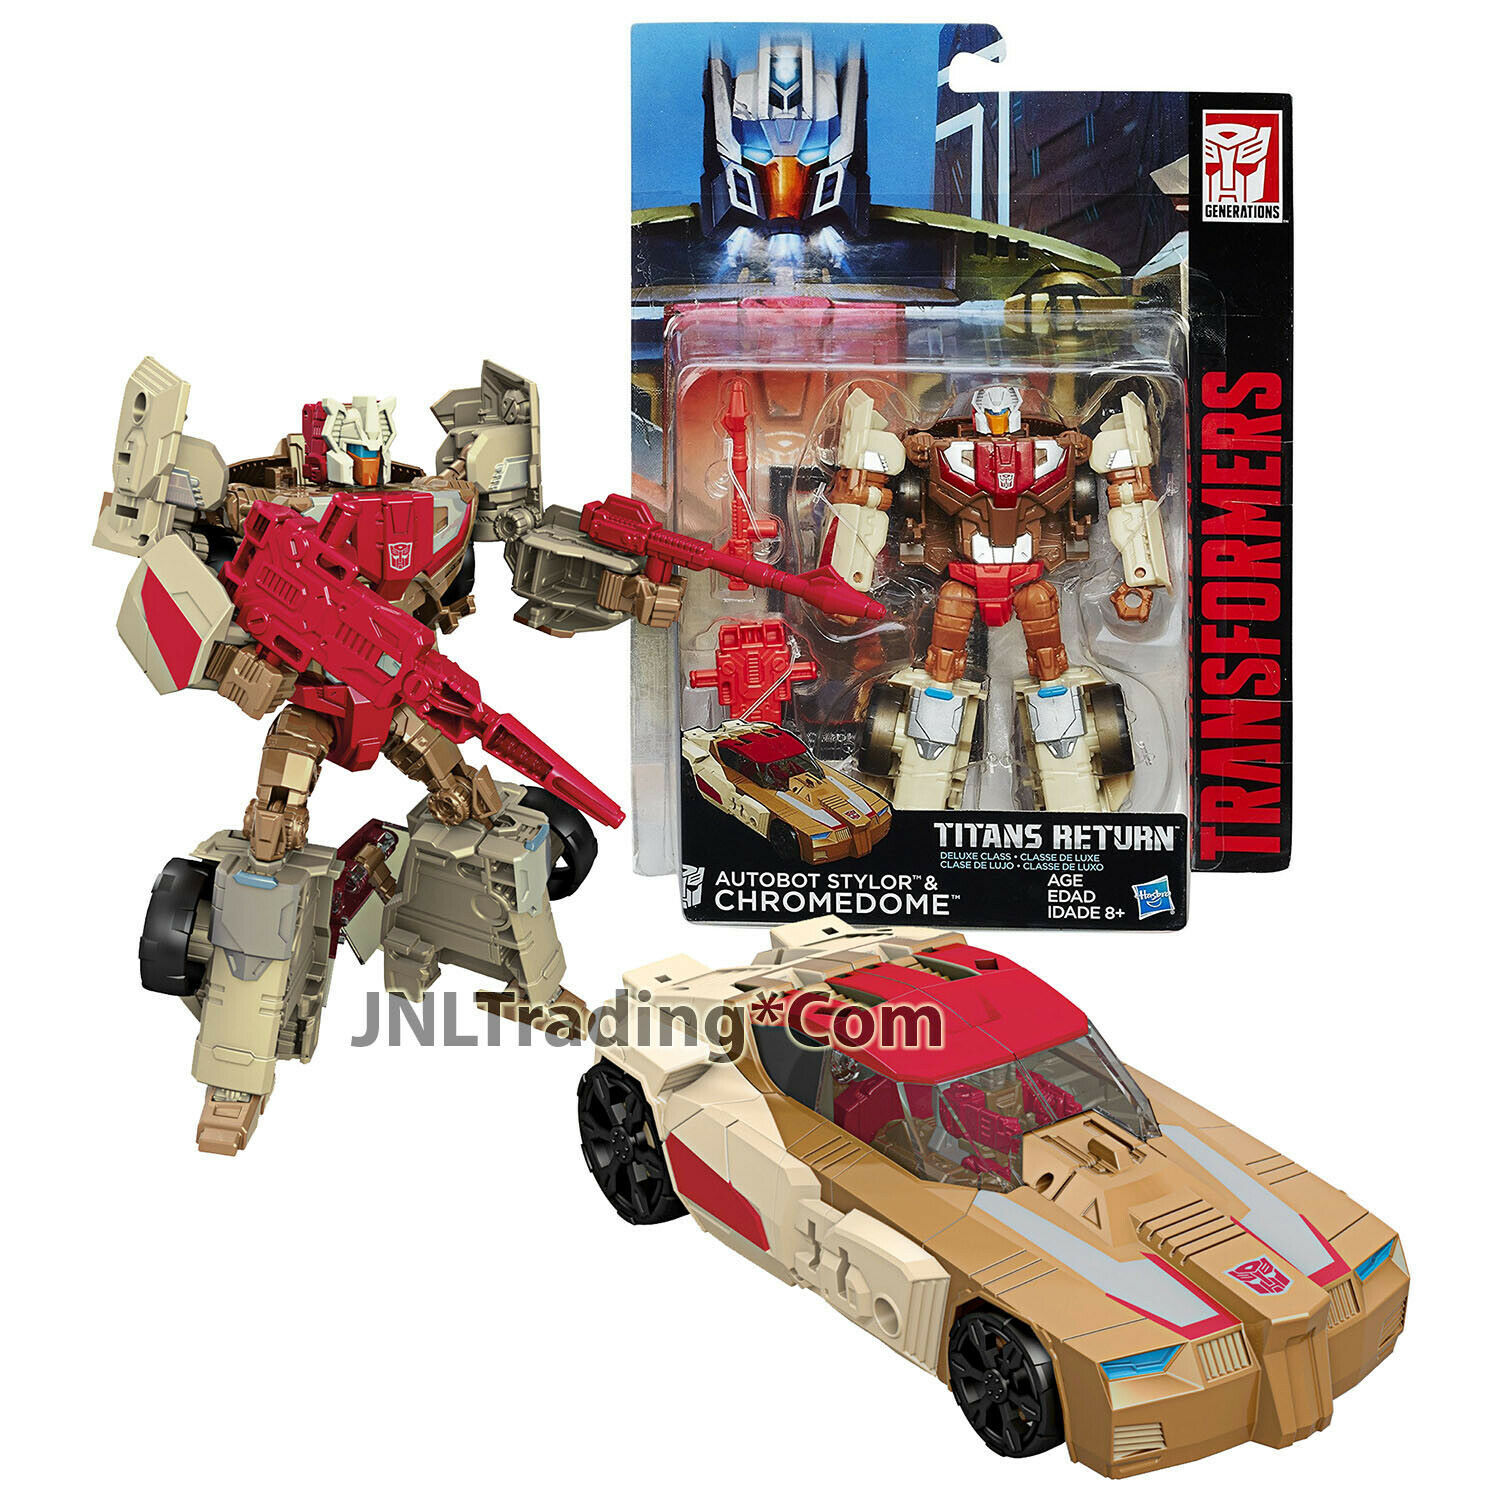 Primary image for Hasbro Year 2015 Transformers Titans Return Figure AUTOBOT STYLOR & CHROMEDOME